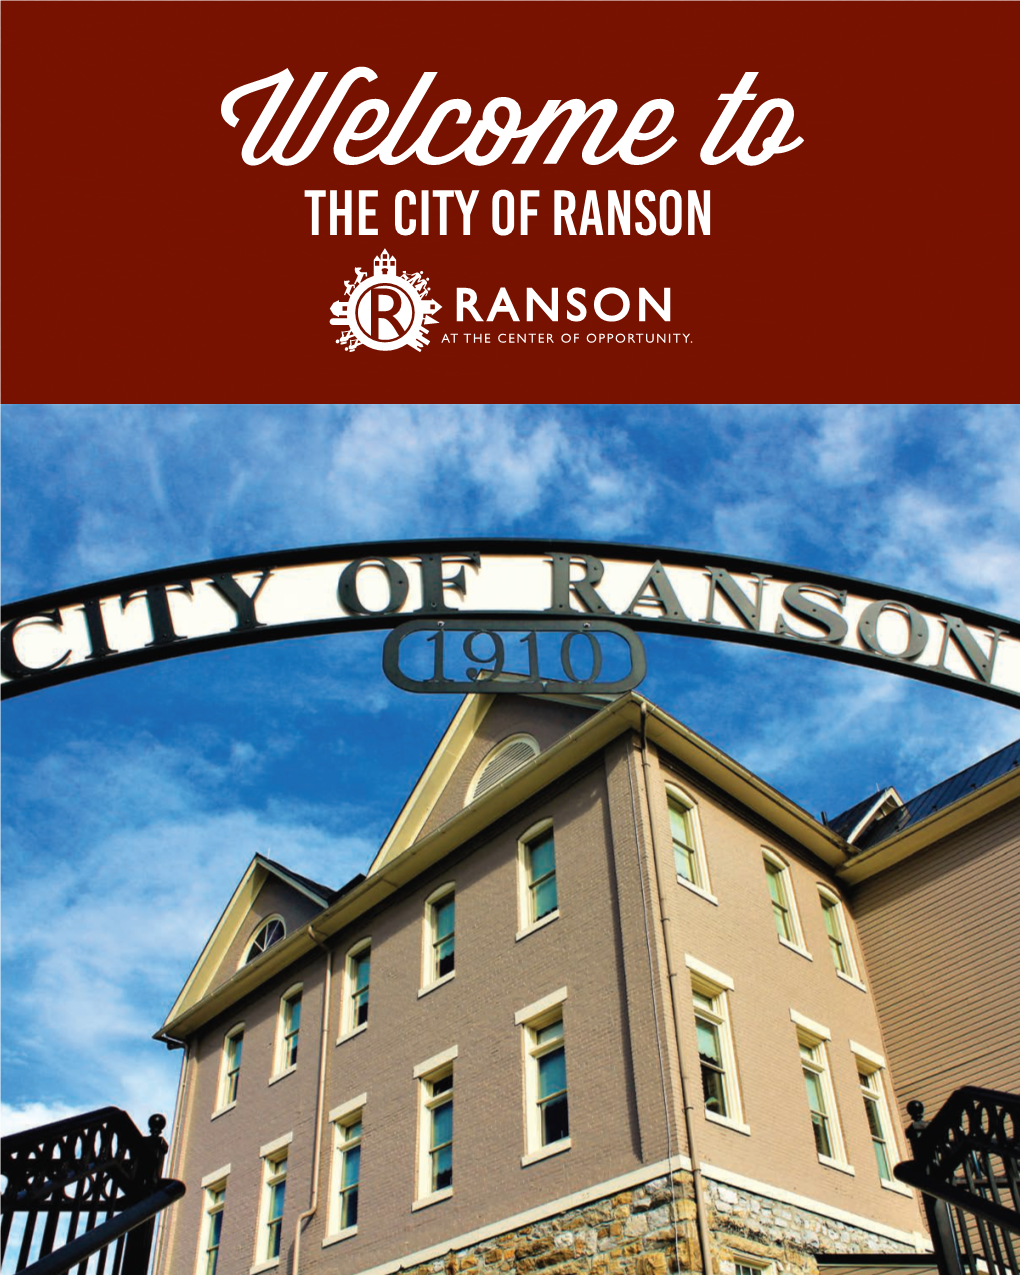 The City of Ranson Welc E to the City of Ranson We Are Glad You Have Chosen to Be Our Neighbor